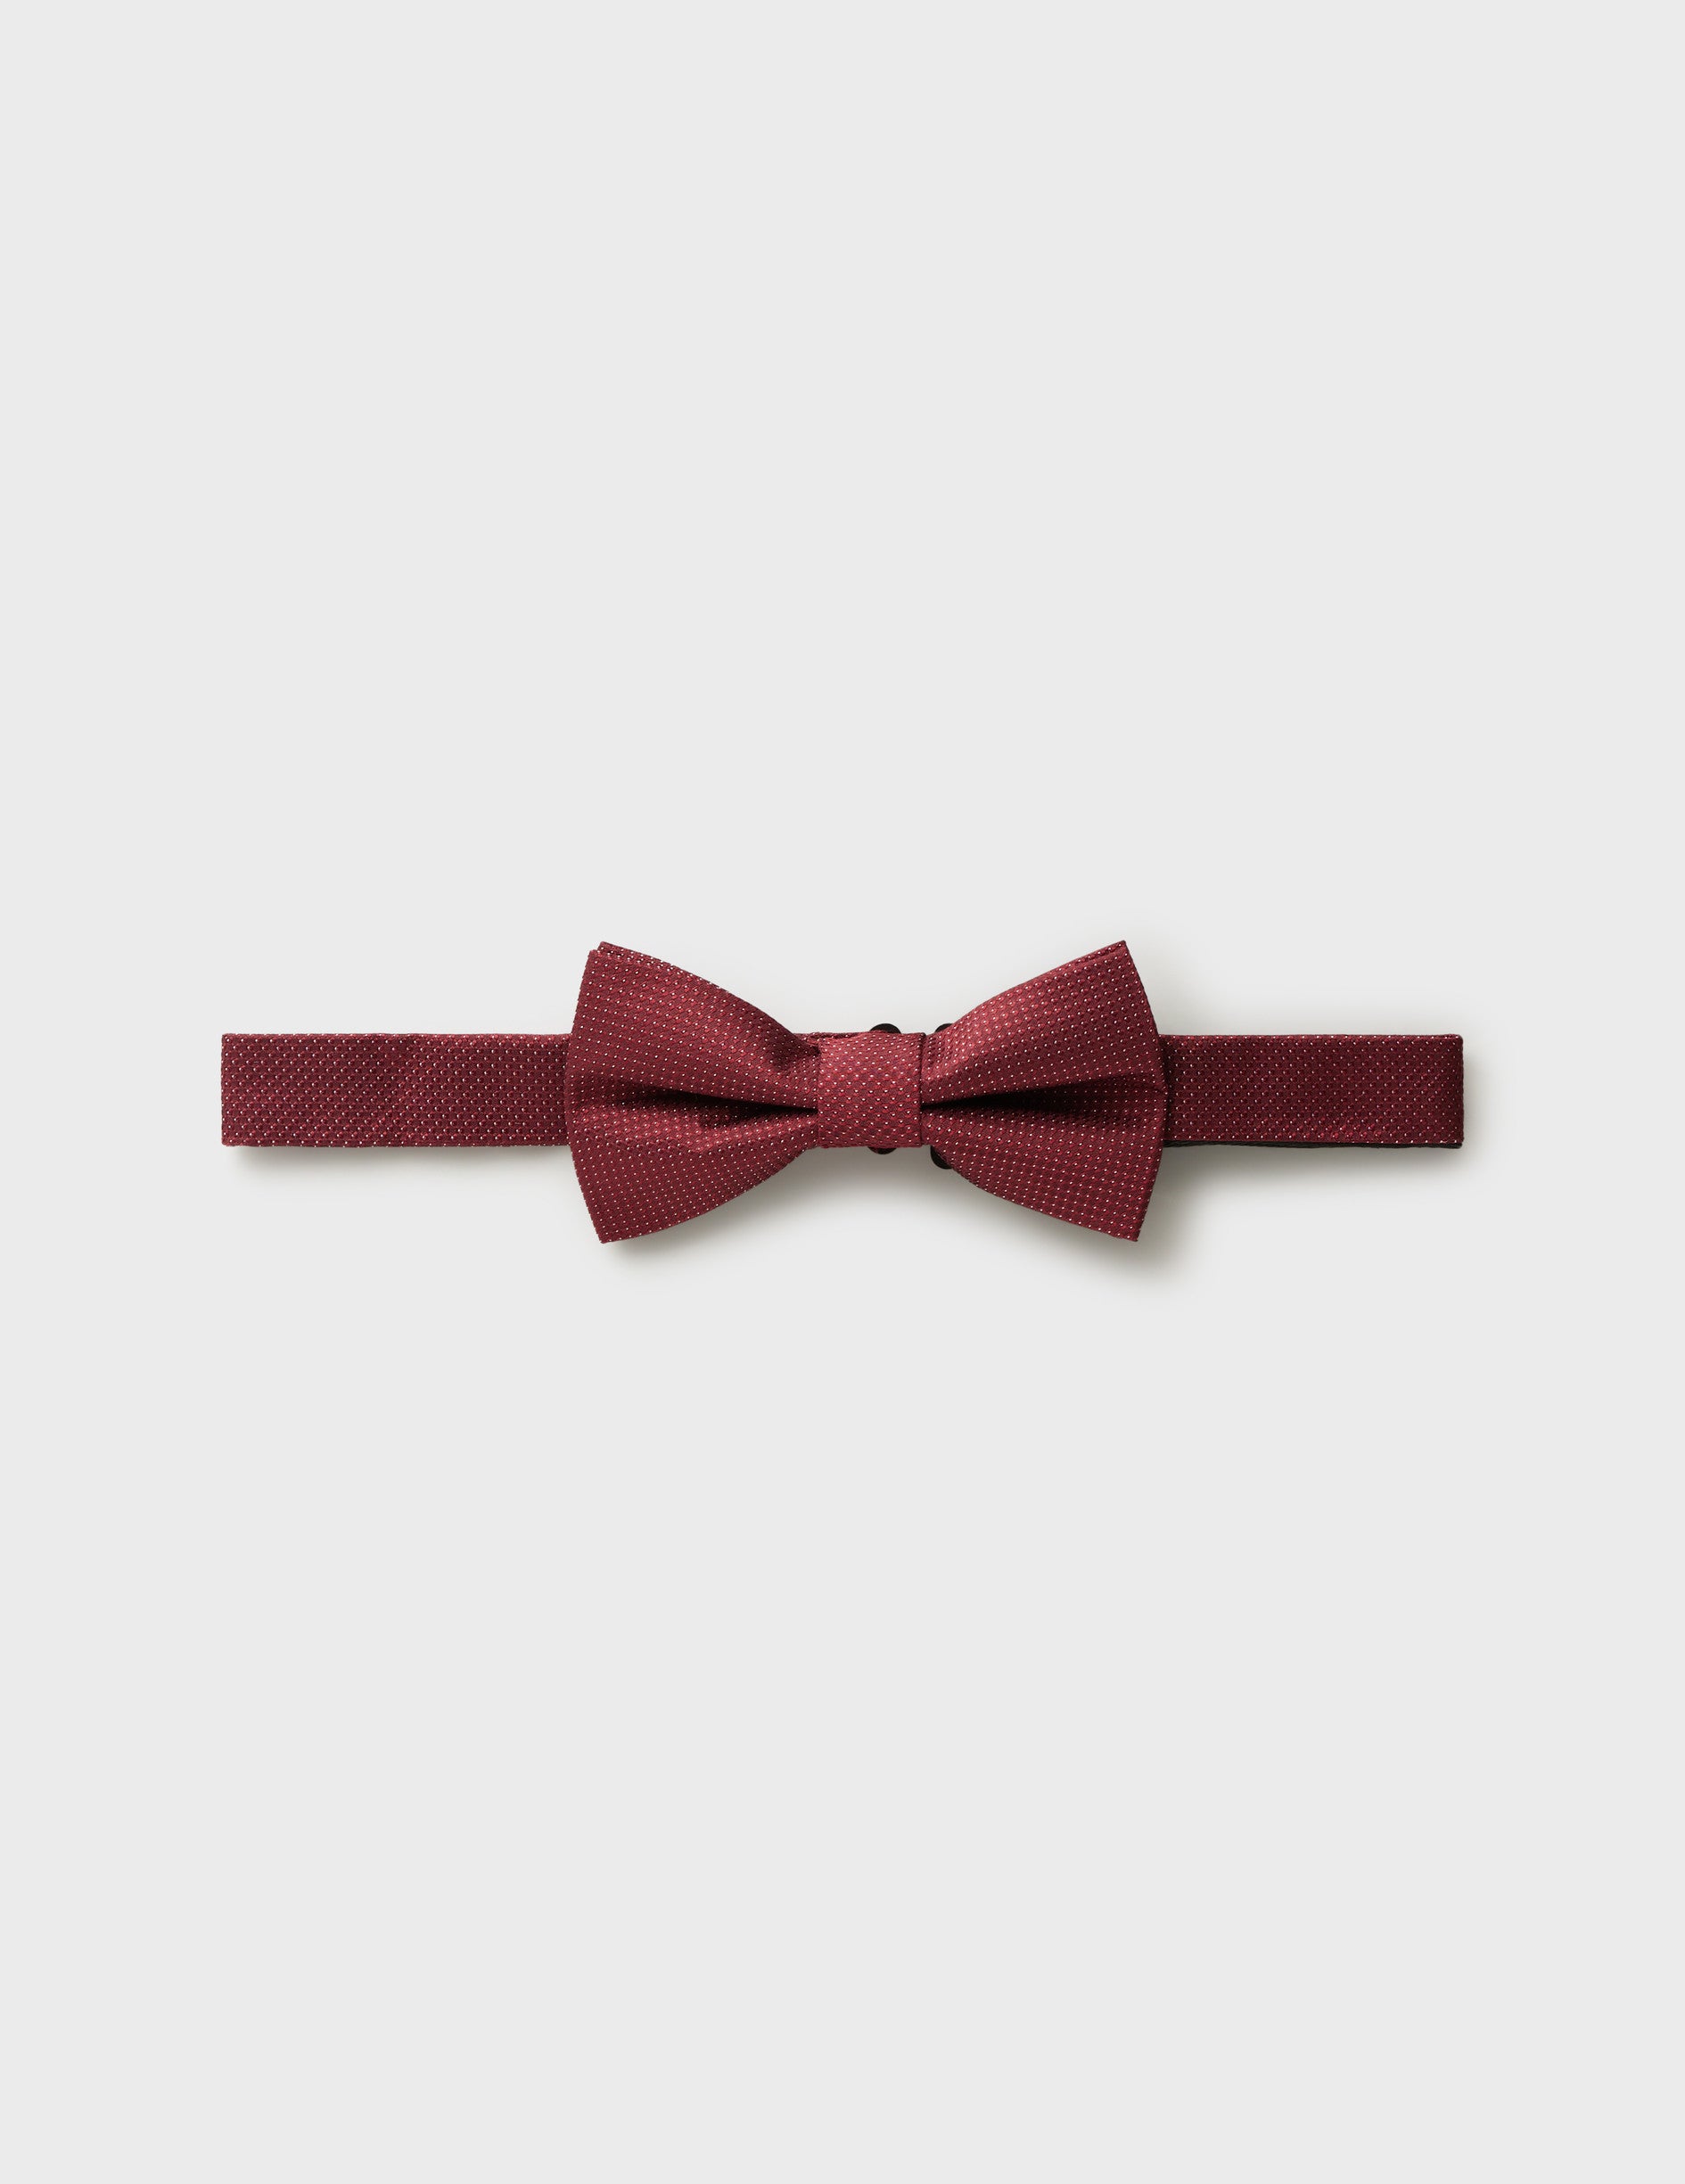 Patterned burgundy silk bow tie